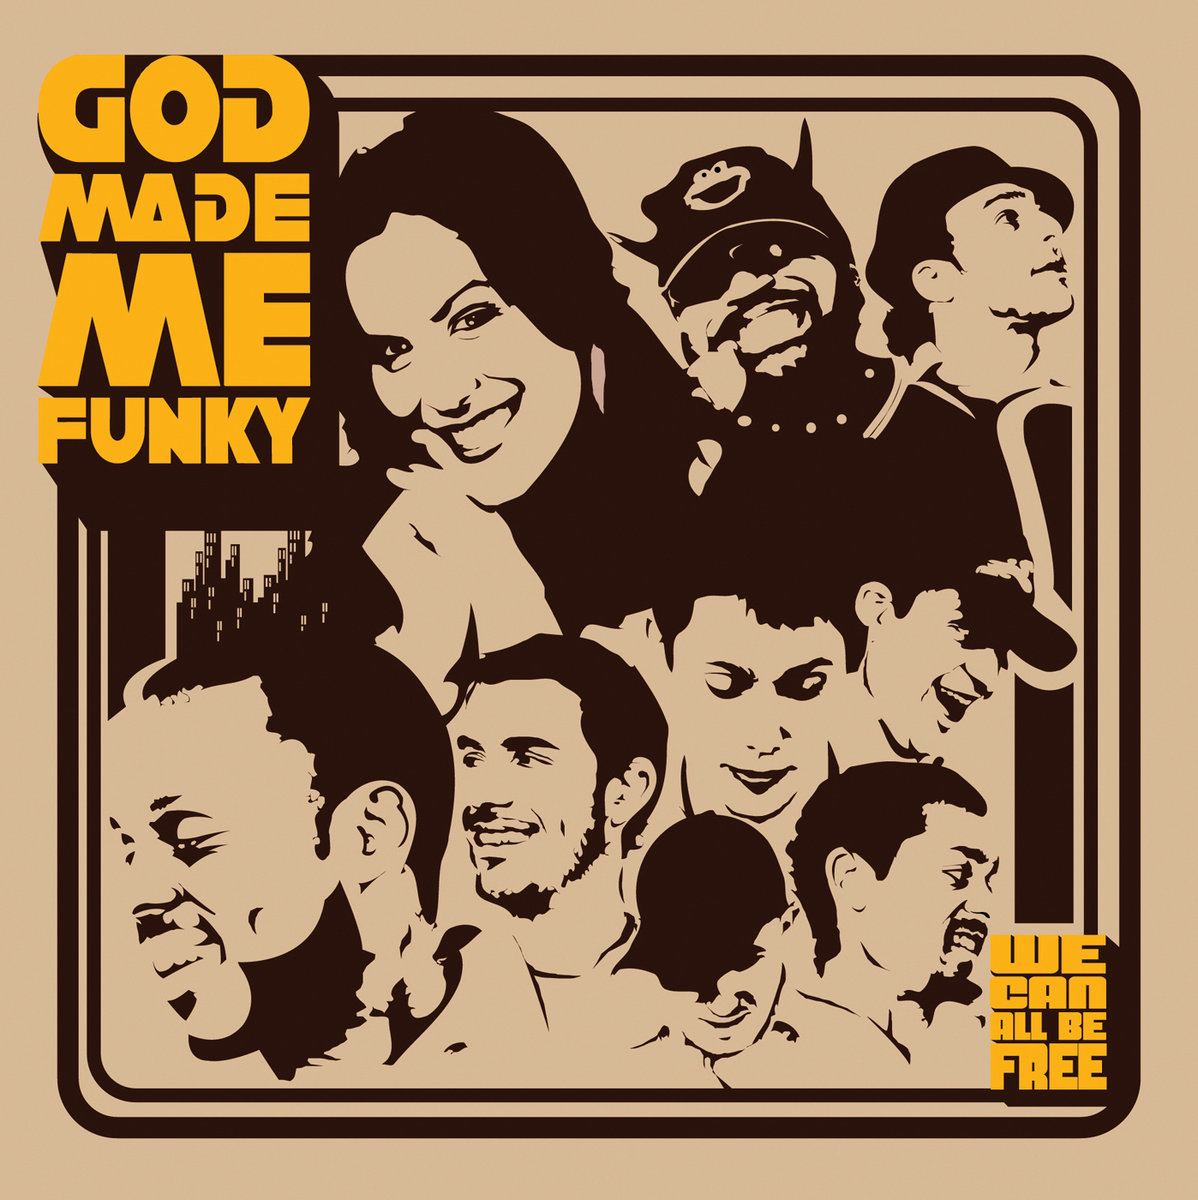 god made me funky luv tday mp3